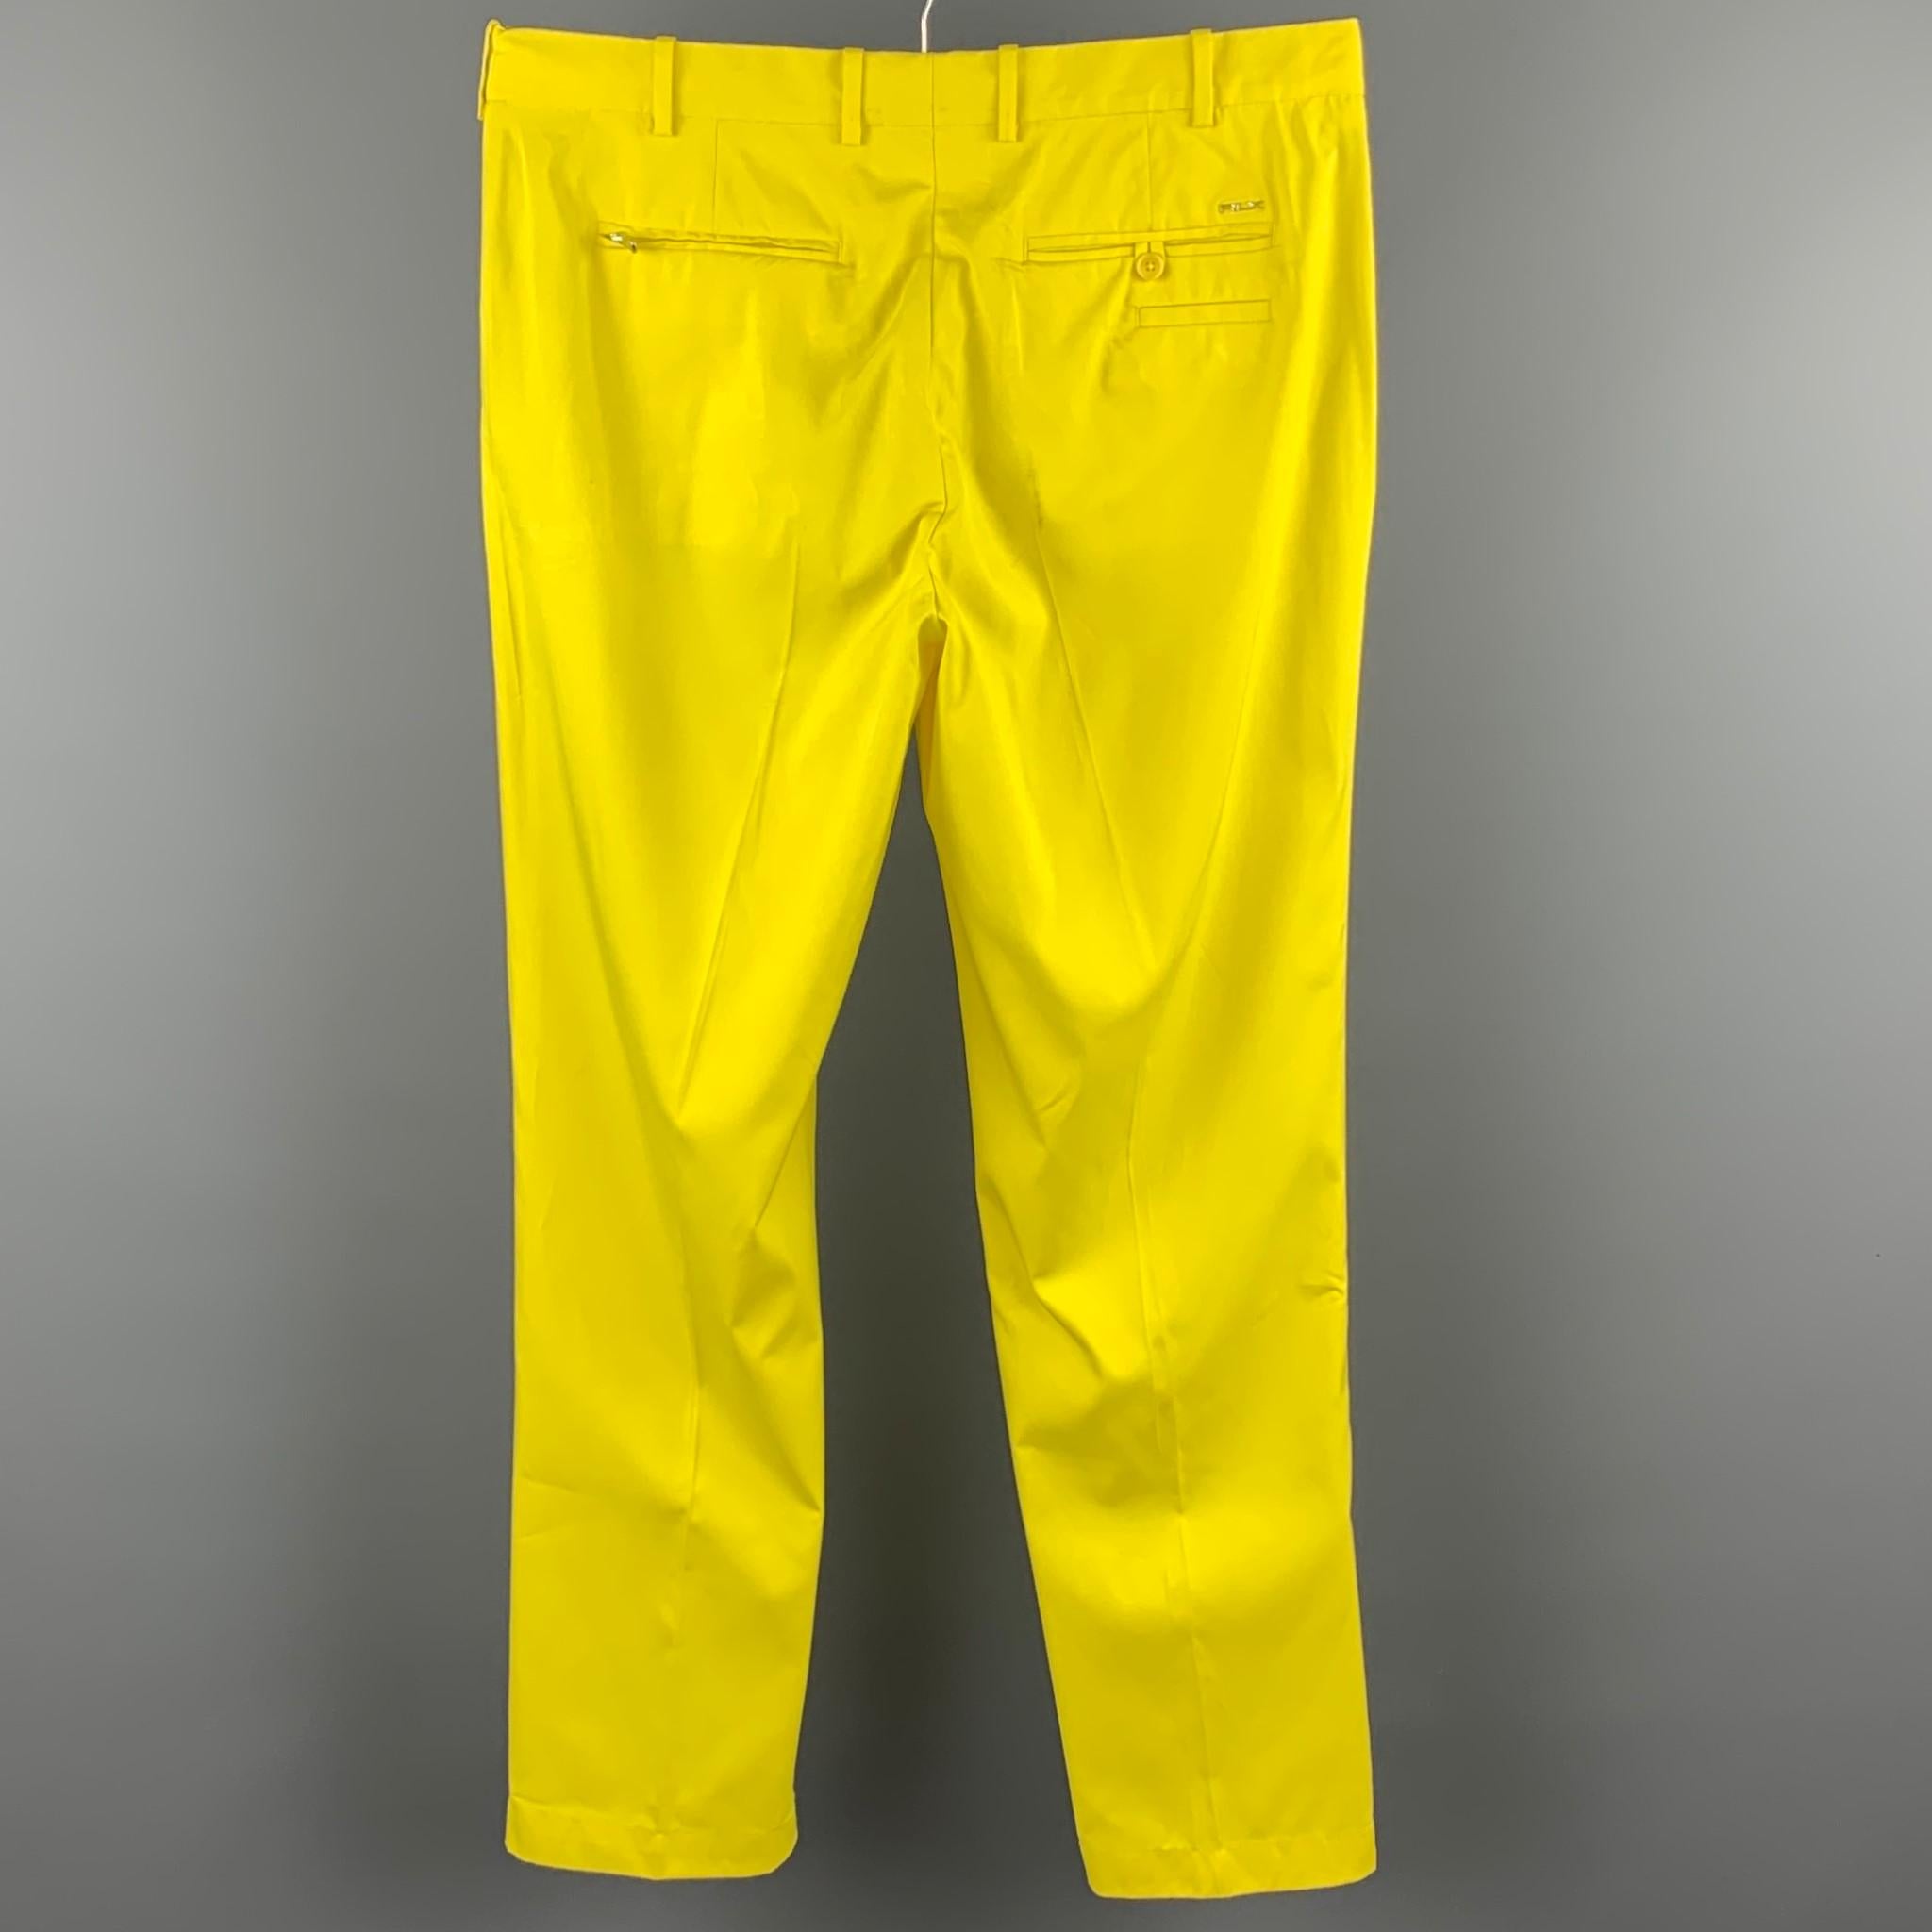 RLX by RALPH LAUREN dress pants comes in a yellow polyester featuring a straight leg, front tab, and a zip fly closure. Moderate wear.

Good Pre-Owned Condition.
Marked: 36/34

Measurements:

Waist: 36 in.
Rise: 11 in.
Inseam: 33 in. 